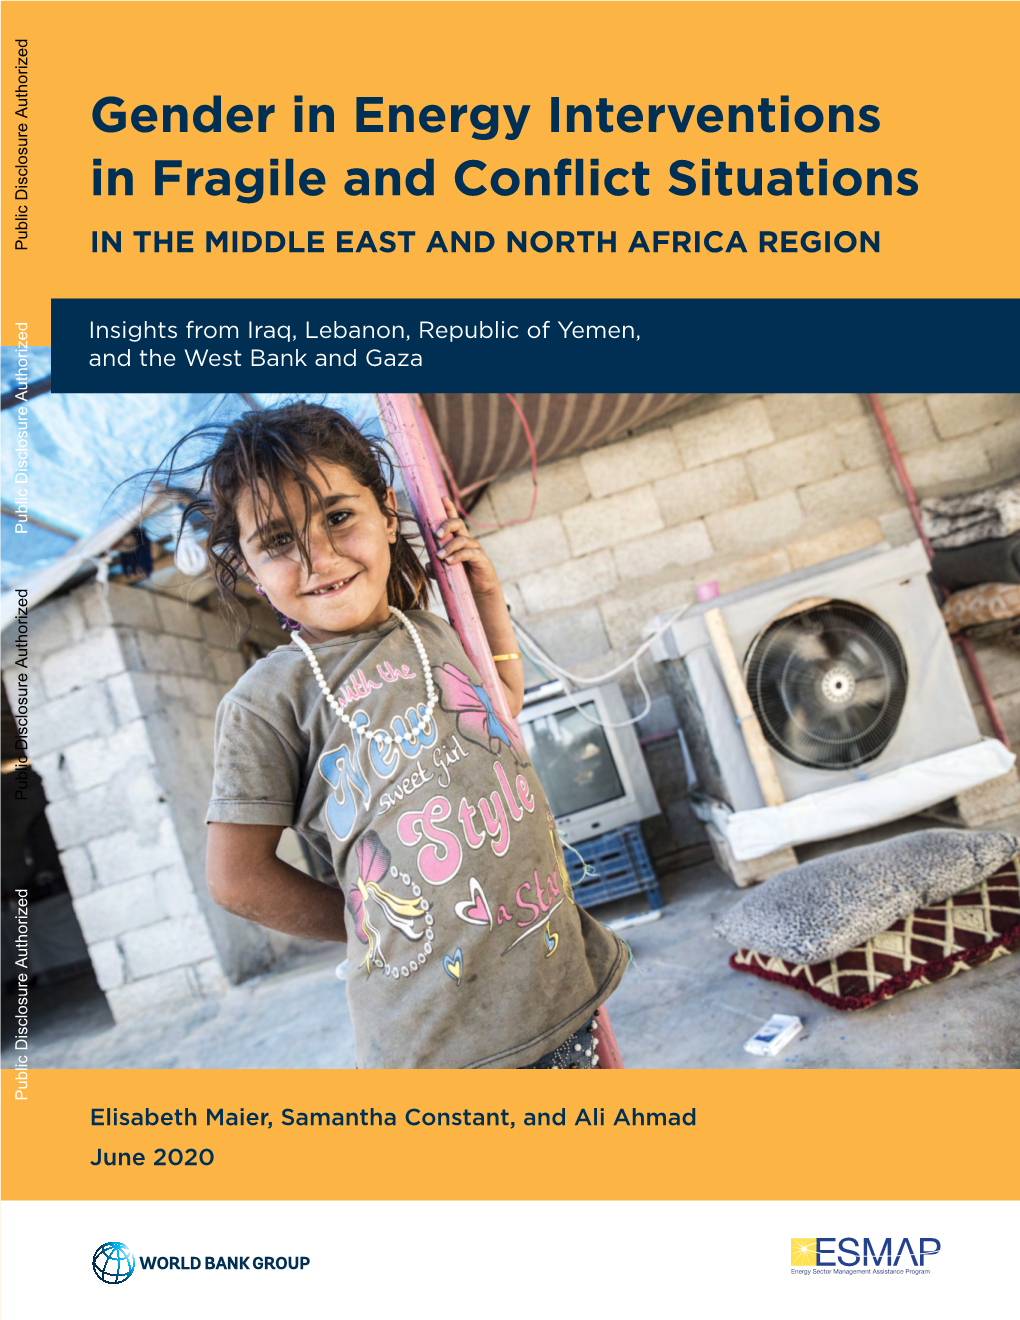 Gender in Energy Interventions in Fragile and Conflict Situations